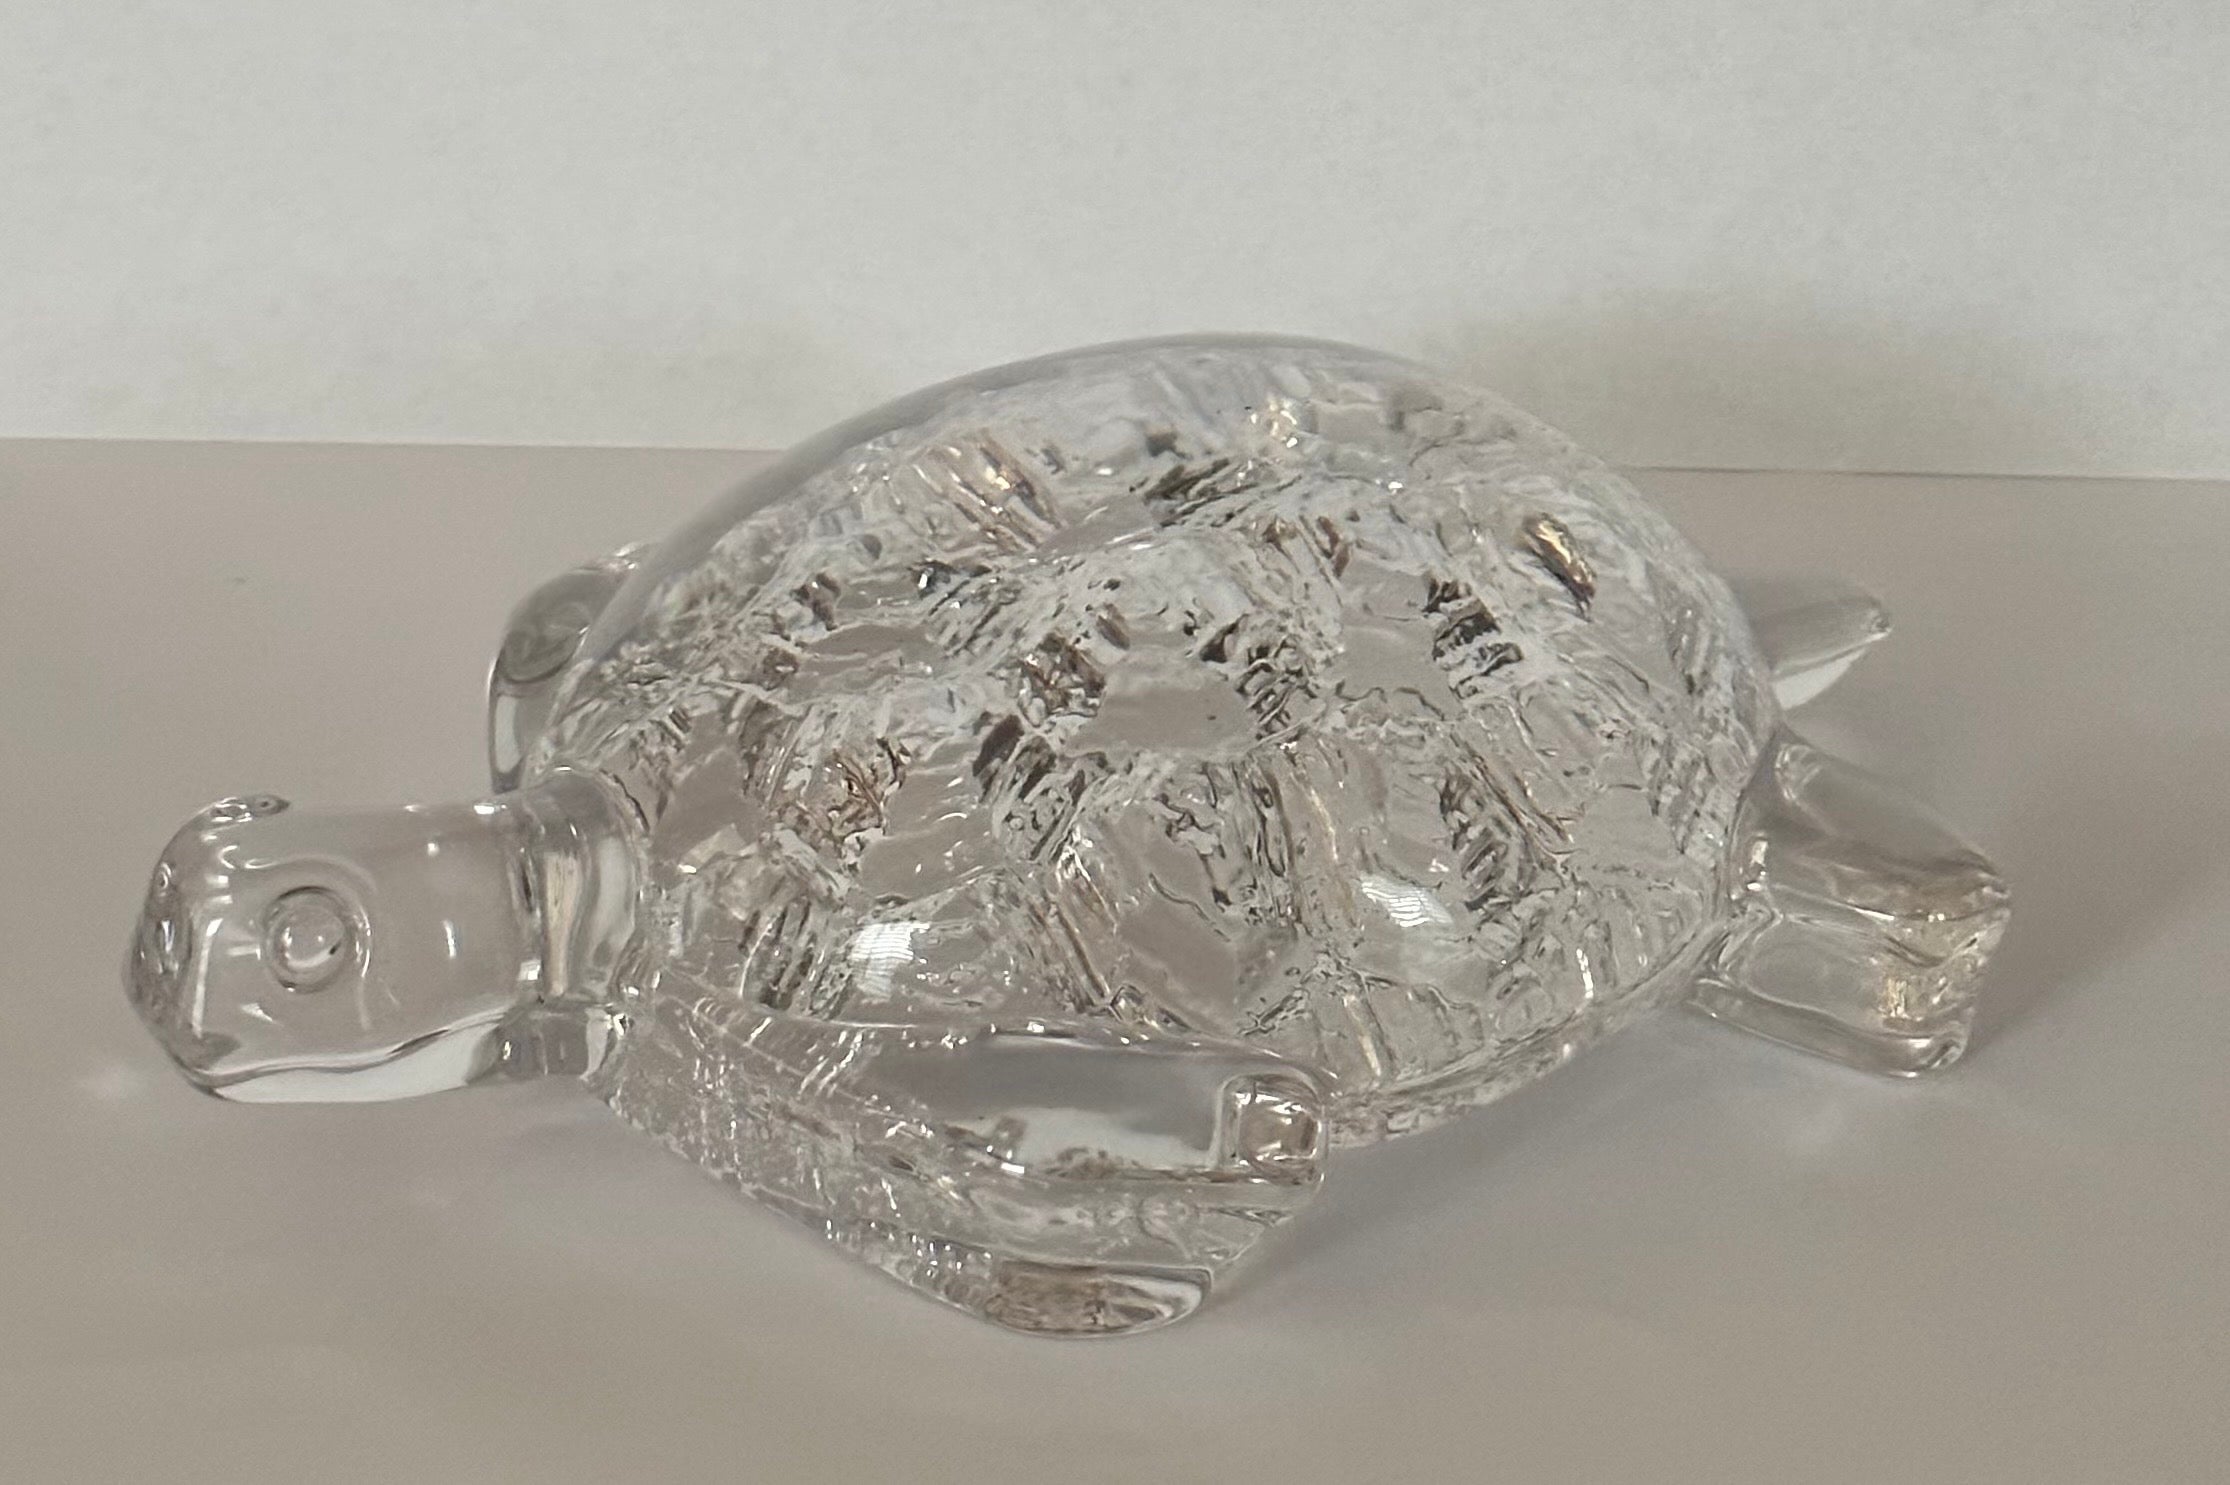 Hollywood Regency Stylized Crystal Turtle Sculpture / Paperweight by Daum France